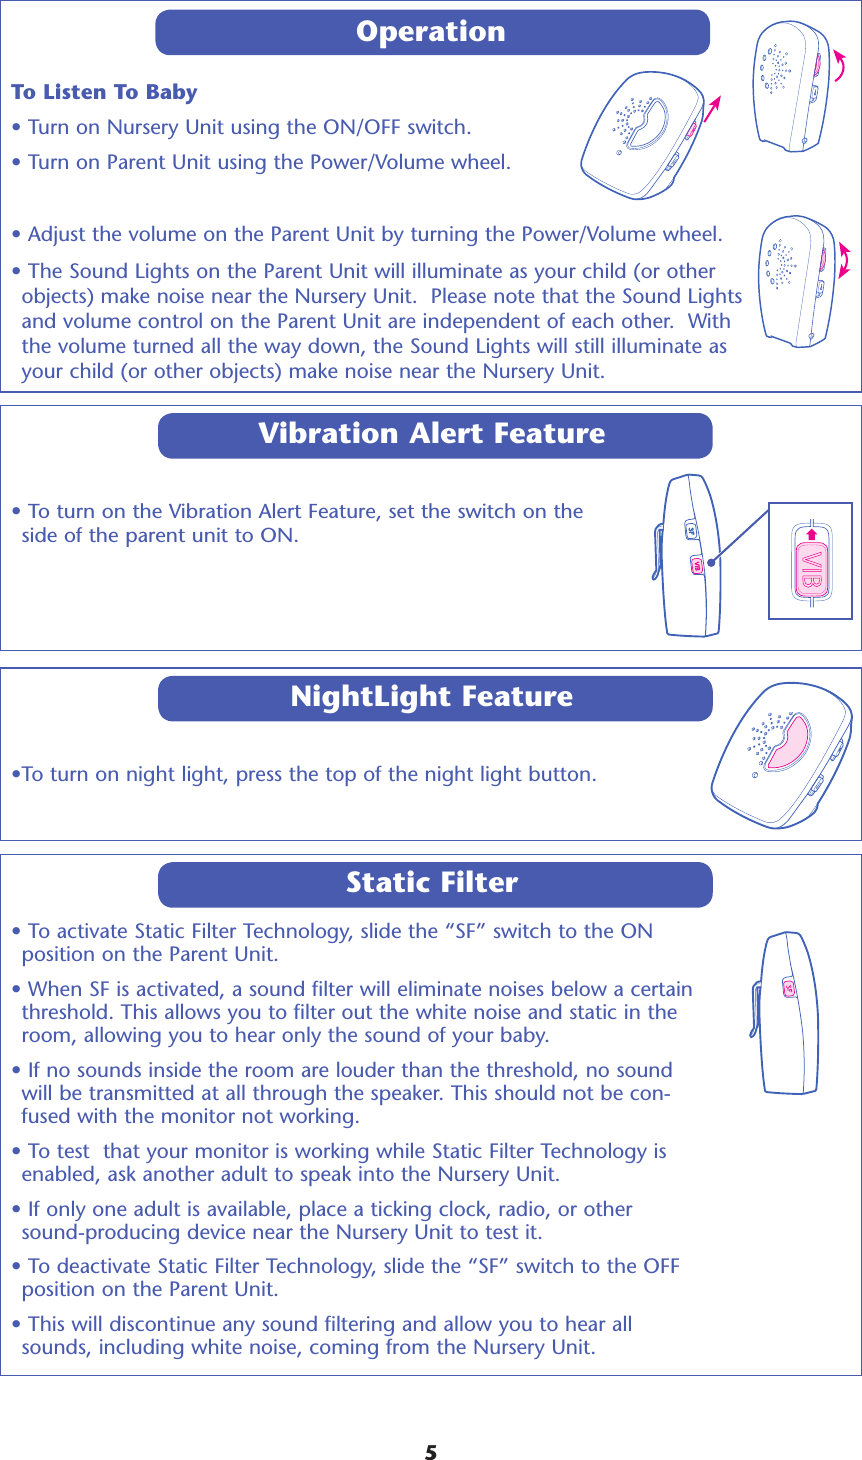 OperationTo Listen To Baby• Turn on Nursery Unit using the ON/OFF switch.• Turn on Parent Unit using the Power/Volume wheel.• Adjust the volume on the Parent Unit by turning the Power/Volume wheel.  • The Sound Lights on the Parent Unit will illuminate as your child (or other objects) make noise near the Nursery Unit.  Please note that the Sound Lights and volume control on the Parent Unit are independent of each other.  With the volume turned all the way down, the Sound Lights will still illuminate as your child (or other objects) make noise near the Nursery Unit. 5• To turn on the Vibration Alert Feature, set the switch on the side of the parent unit to ON.Vibration Alert Feature•To turn on night light, press the top of the night light button.NightLight Feature• To activate Static Filter Technology, slide the “SF” switch to the ON position on the Parent Unit.  • When SF is activated, a sound filter will eliminate noises below a certain threshold. This allows you to filter out the white noise and static in the room, allowing you to hear only the sound of your baby. • If no sounds inside the room are louder than the threshold, no sound will be transmitted at all through the speaker. This should not be con-fused with the monitor not working. • To test  that your monitor is working while Static Filter Technology is enabled, ask another adult to speak into the Nursery Unit. • If only one adult is available, place a ticking clock, radio, or other sound-producing device near the Nursery Unit to test it. • To deactivate Static Filter Technology, slide the “SF” switch to the OFF position on the Parent Unit. • This will discontinue any sound filtering and allow you to hear all sounds, including white noise, coming from the Nursery Unit. Static Filter